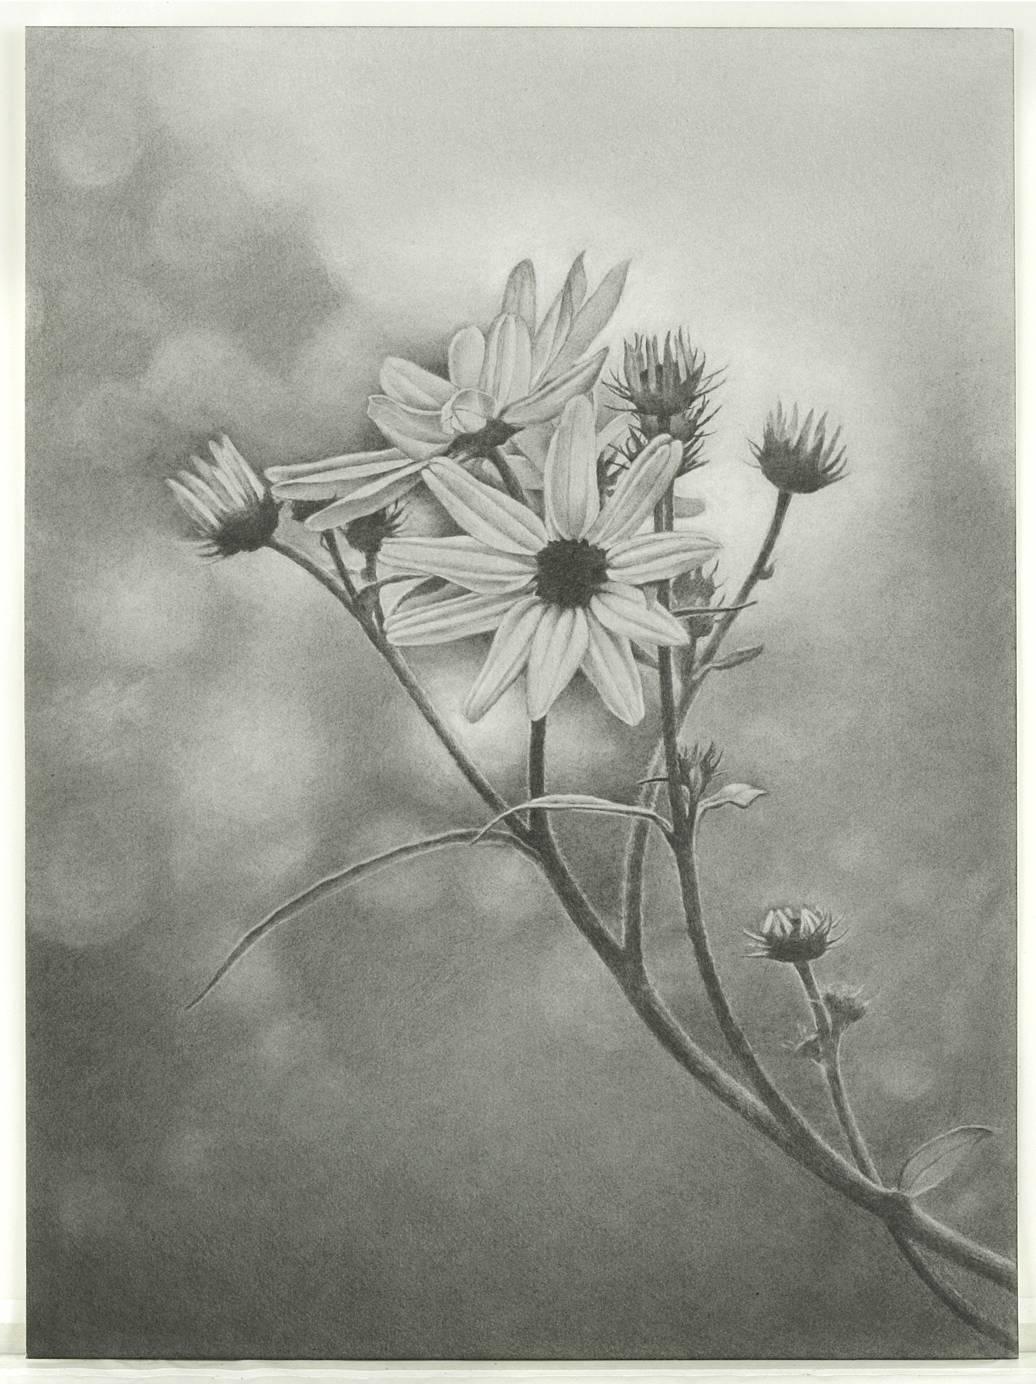 Mary Reilly Figurative Art - Wildflower, Central Park, photorealist graphite drawing, 2011